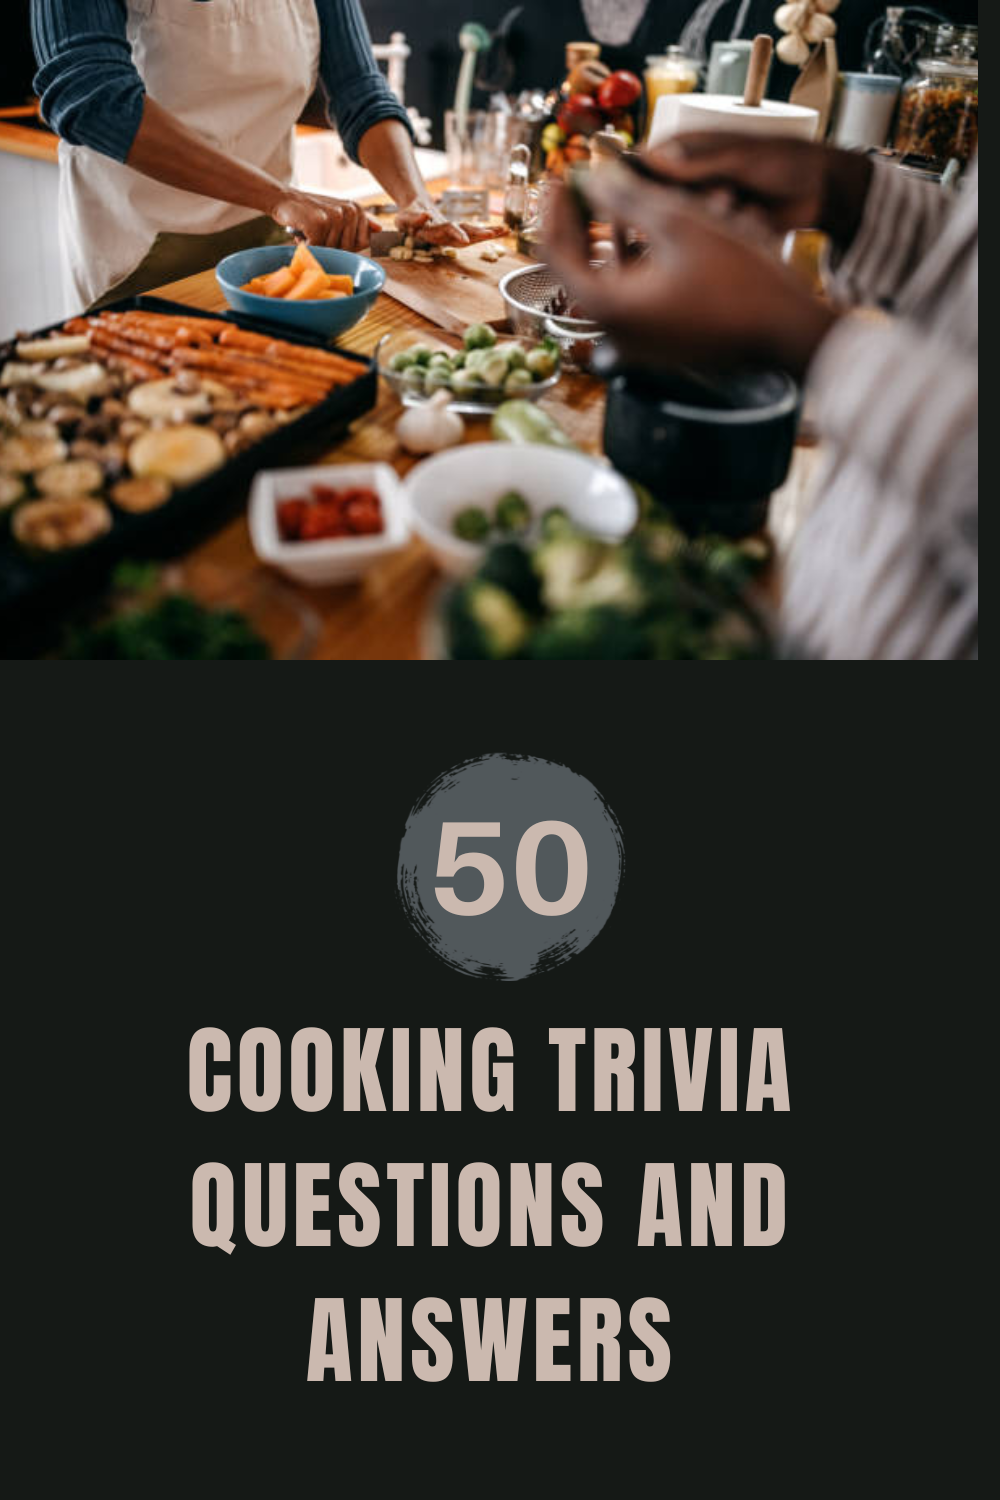 50 Cooking Trivia Questions and Answers